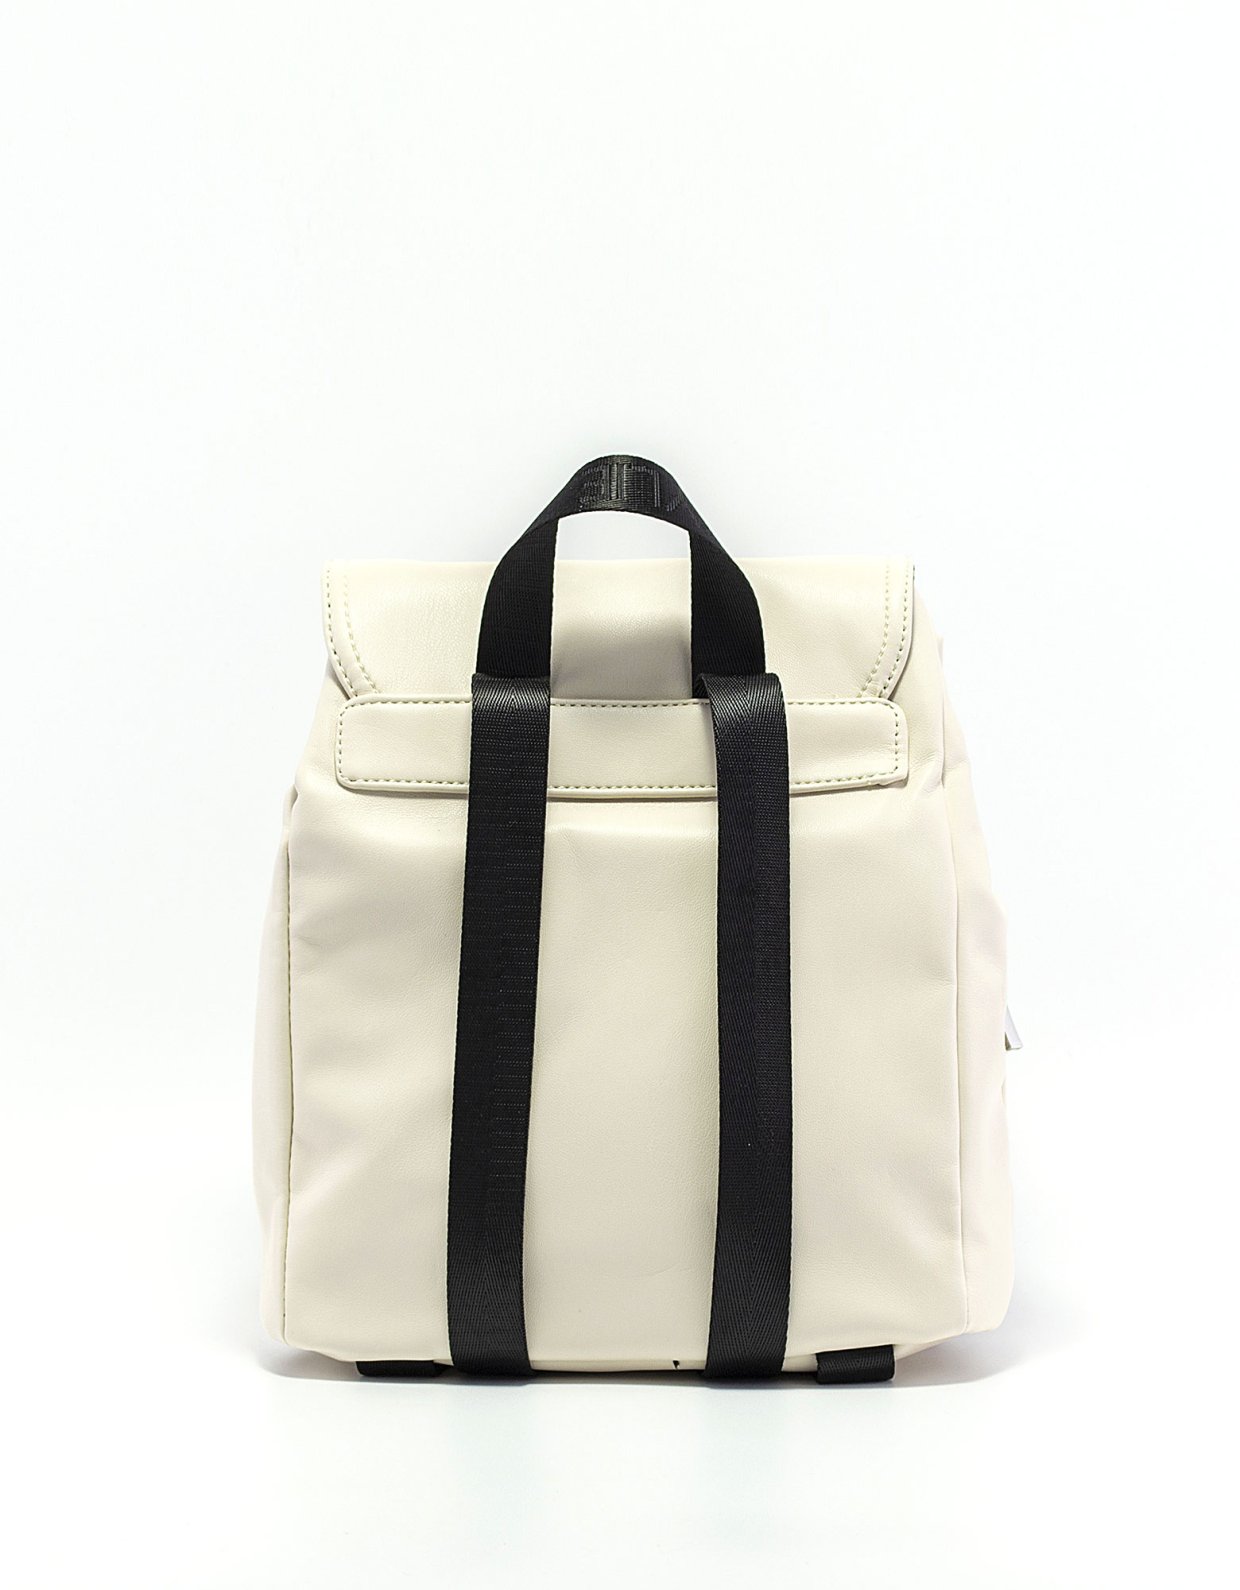 Kendall + Kylie Jesse backpack off white